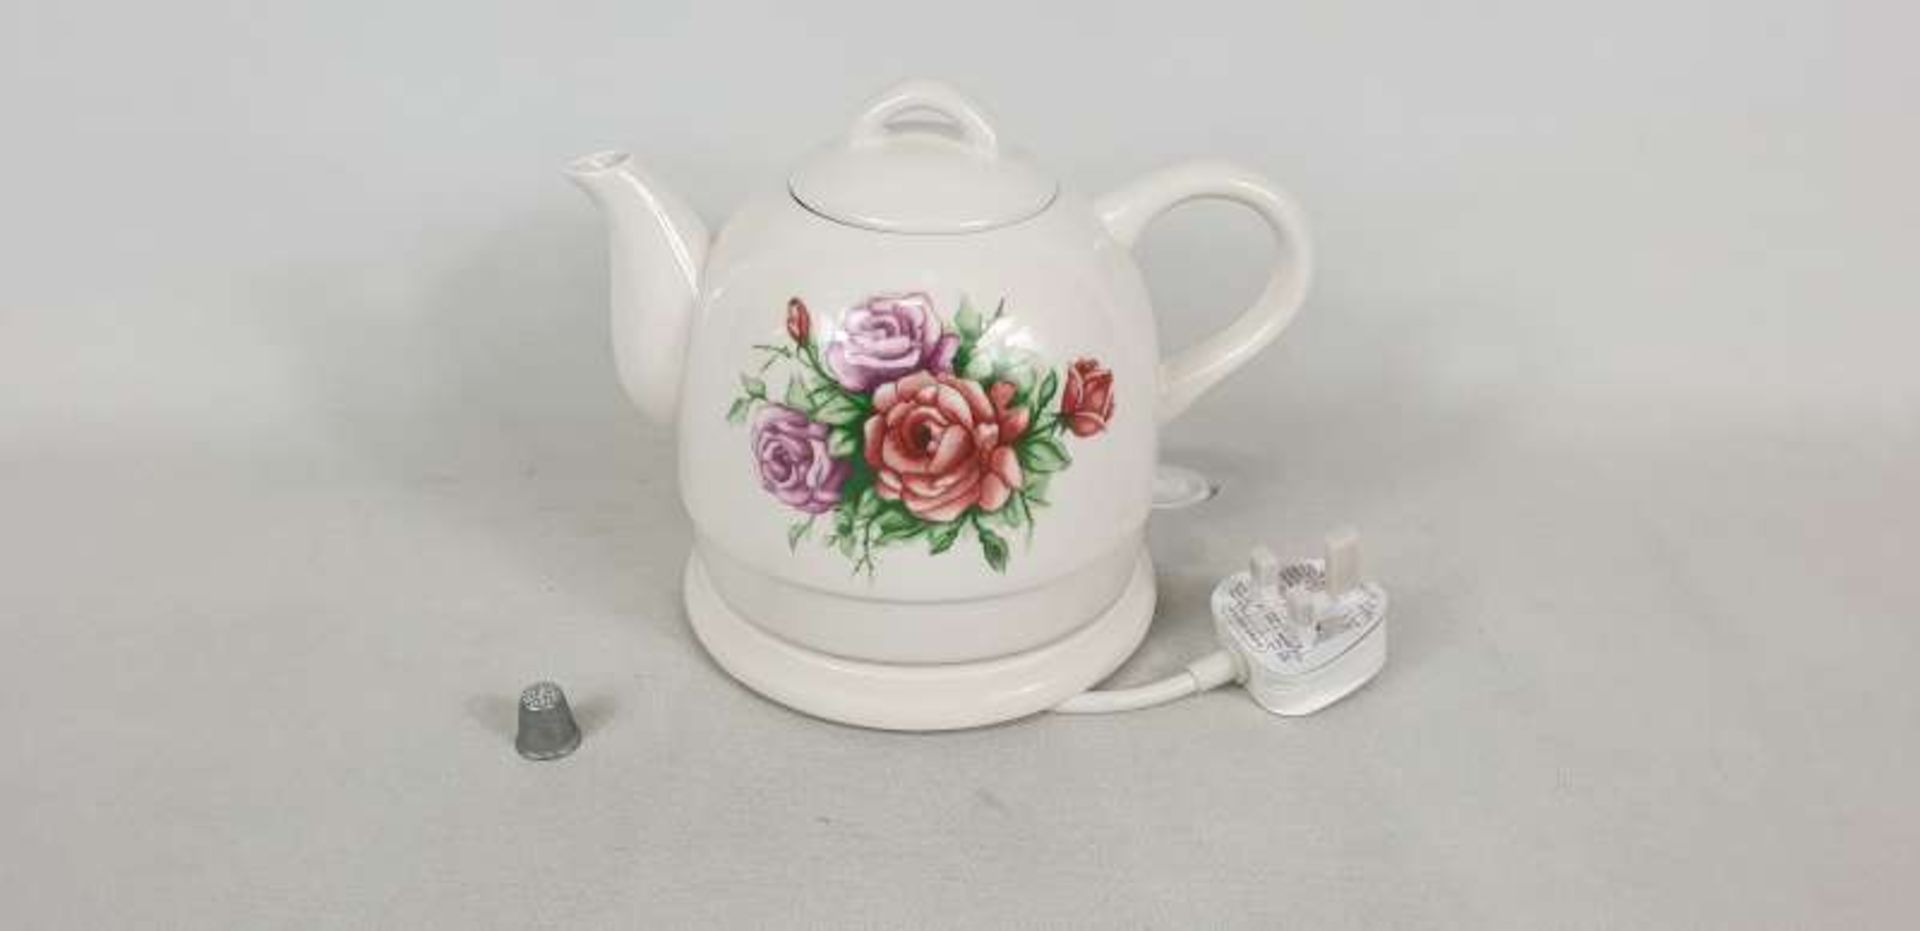 20 X BRAND NEW BOXED CERAMIC KETTLES WITH FLORAL DETAIL IN 5 BOXES